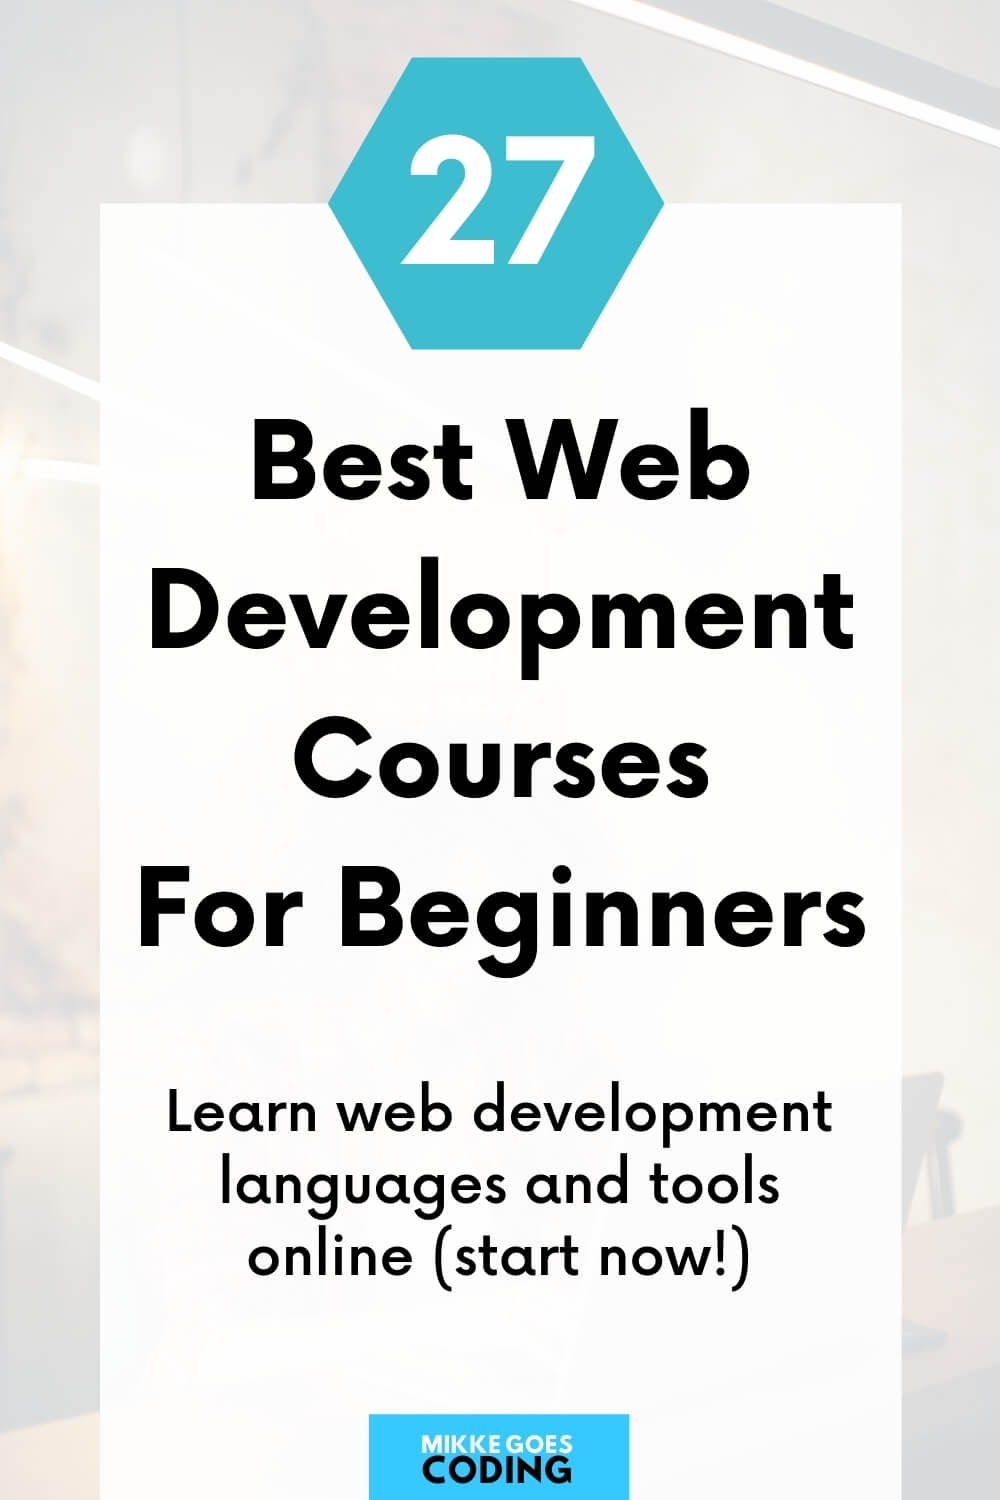 27 Best Web Development Courses for Beginners in 2022 (Free and Paid)